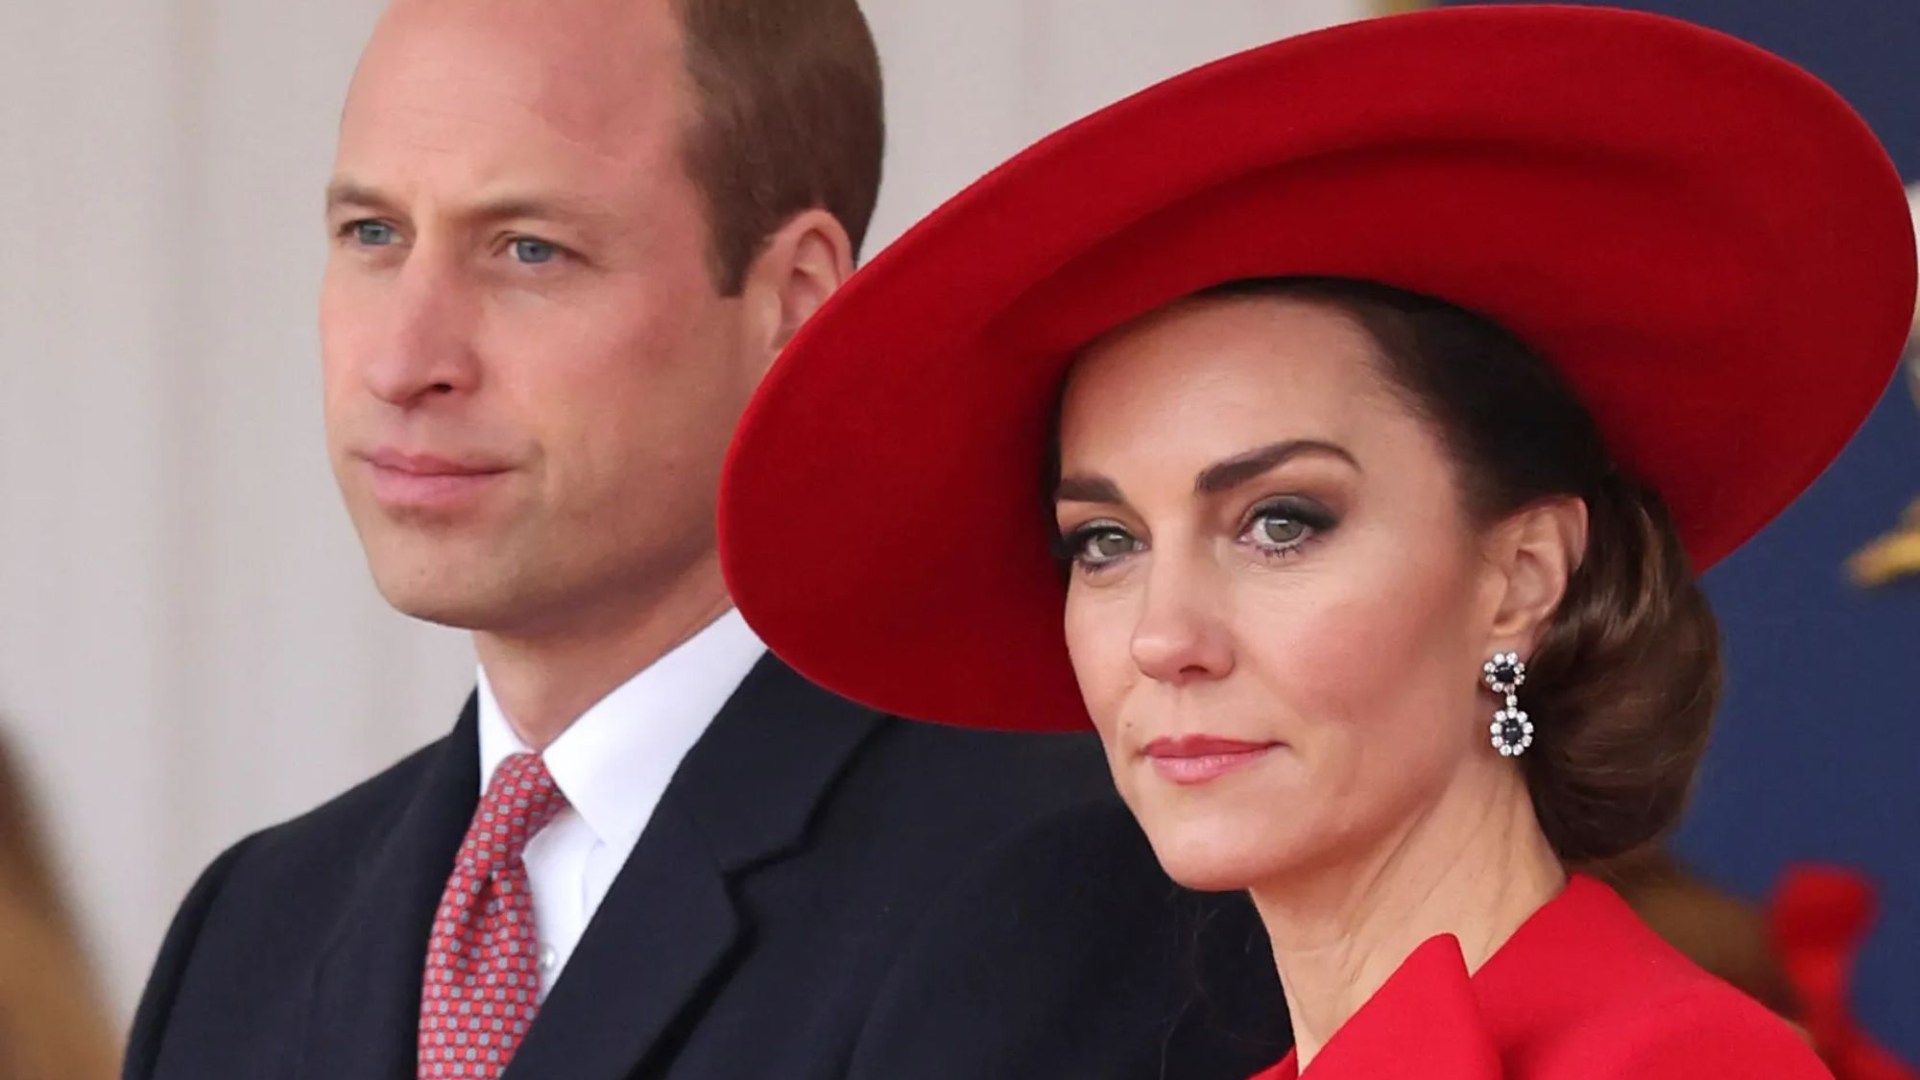 William & I are helped through harder times by outpouring of kindness, says Kate – as she shares cancer treatment update [Video]